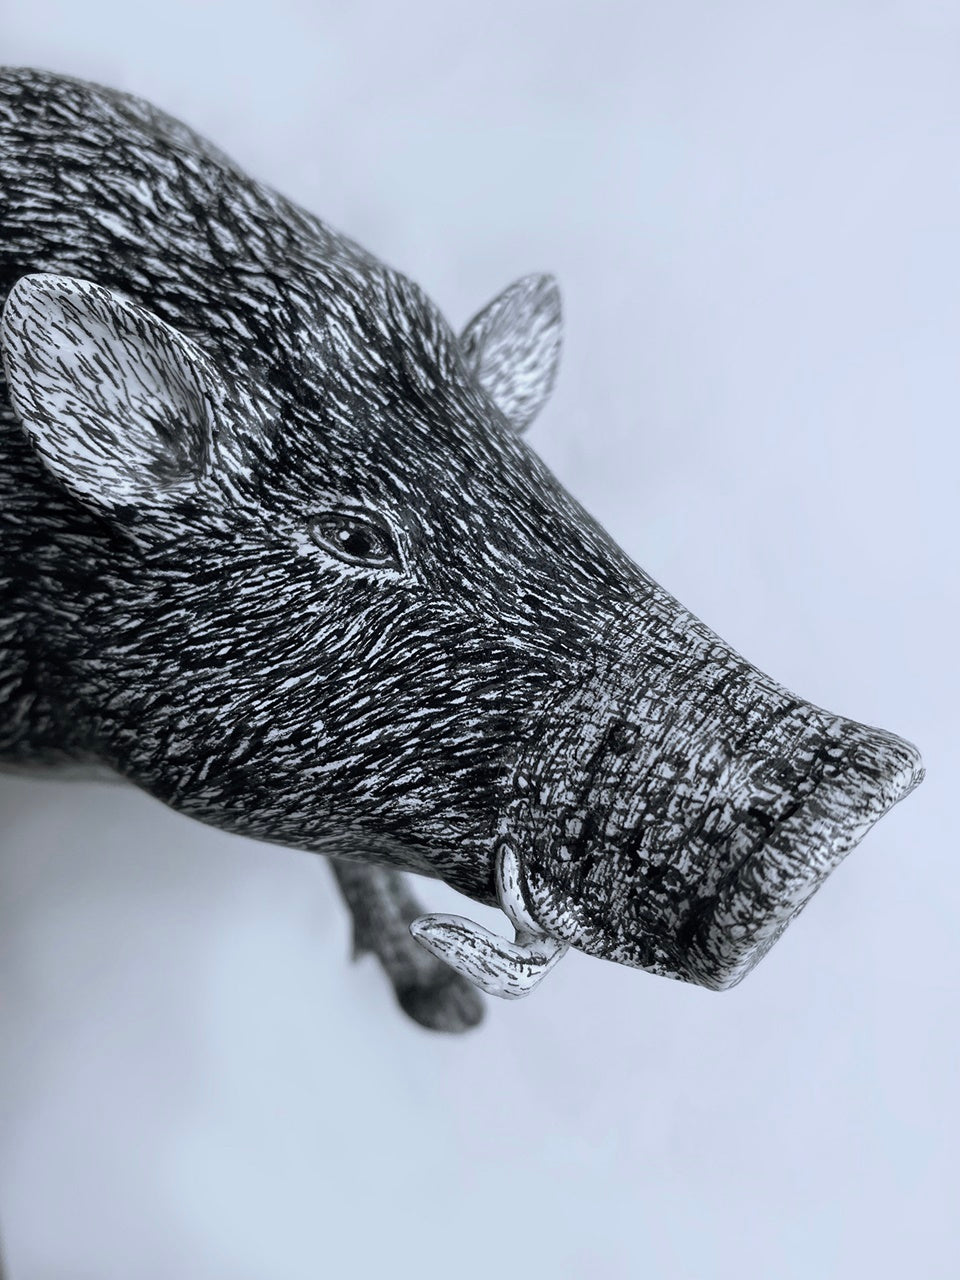 3-Draw Japanese forest animals series  “boar”